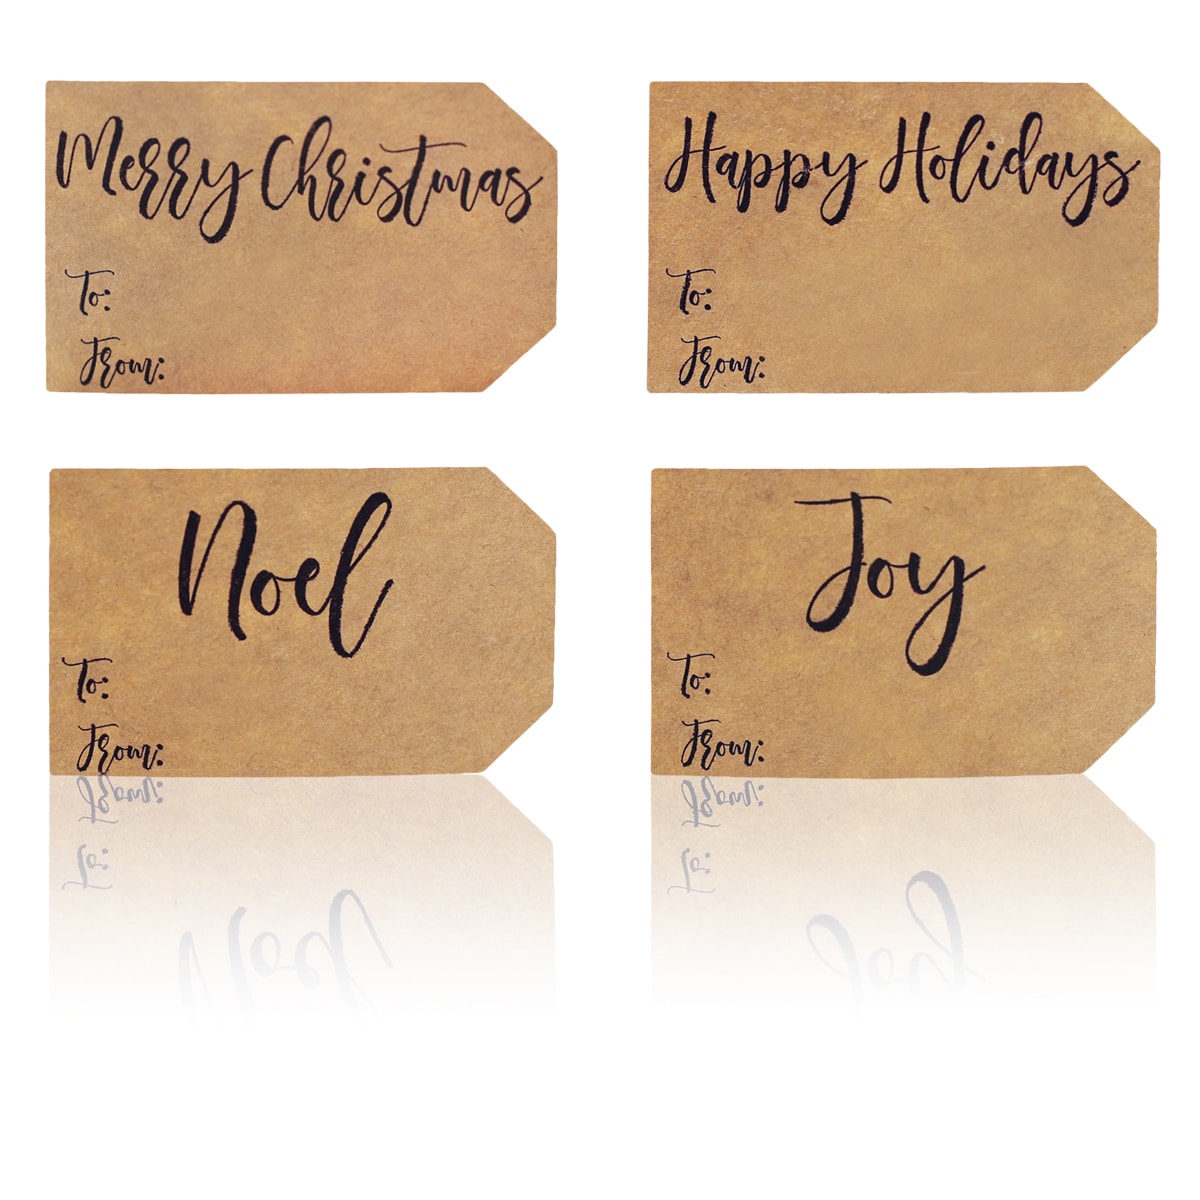 100 Funny Christmas Gift Tags, Gift Name Tags for Christmas, Christmas Gift  Tags with Funny Messages, Hilarious Gift Tags with String (2'' x 3'')